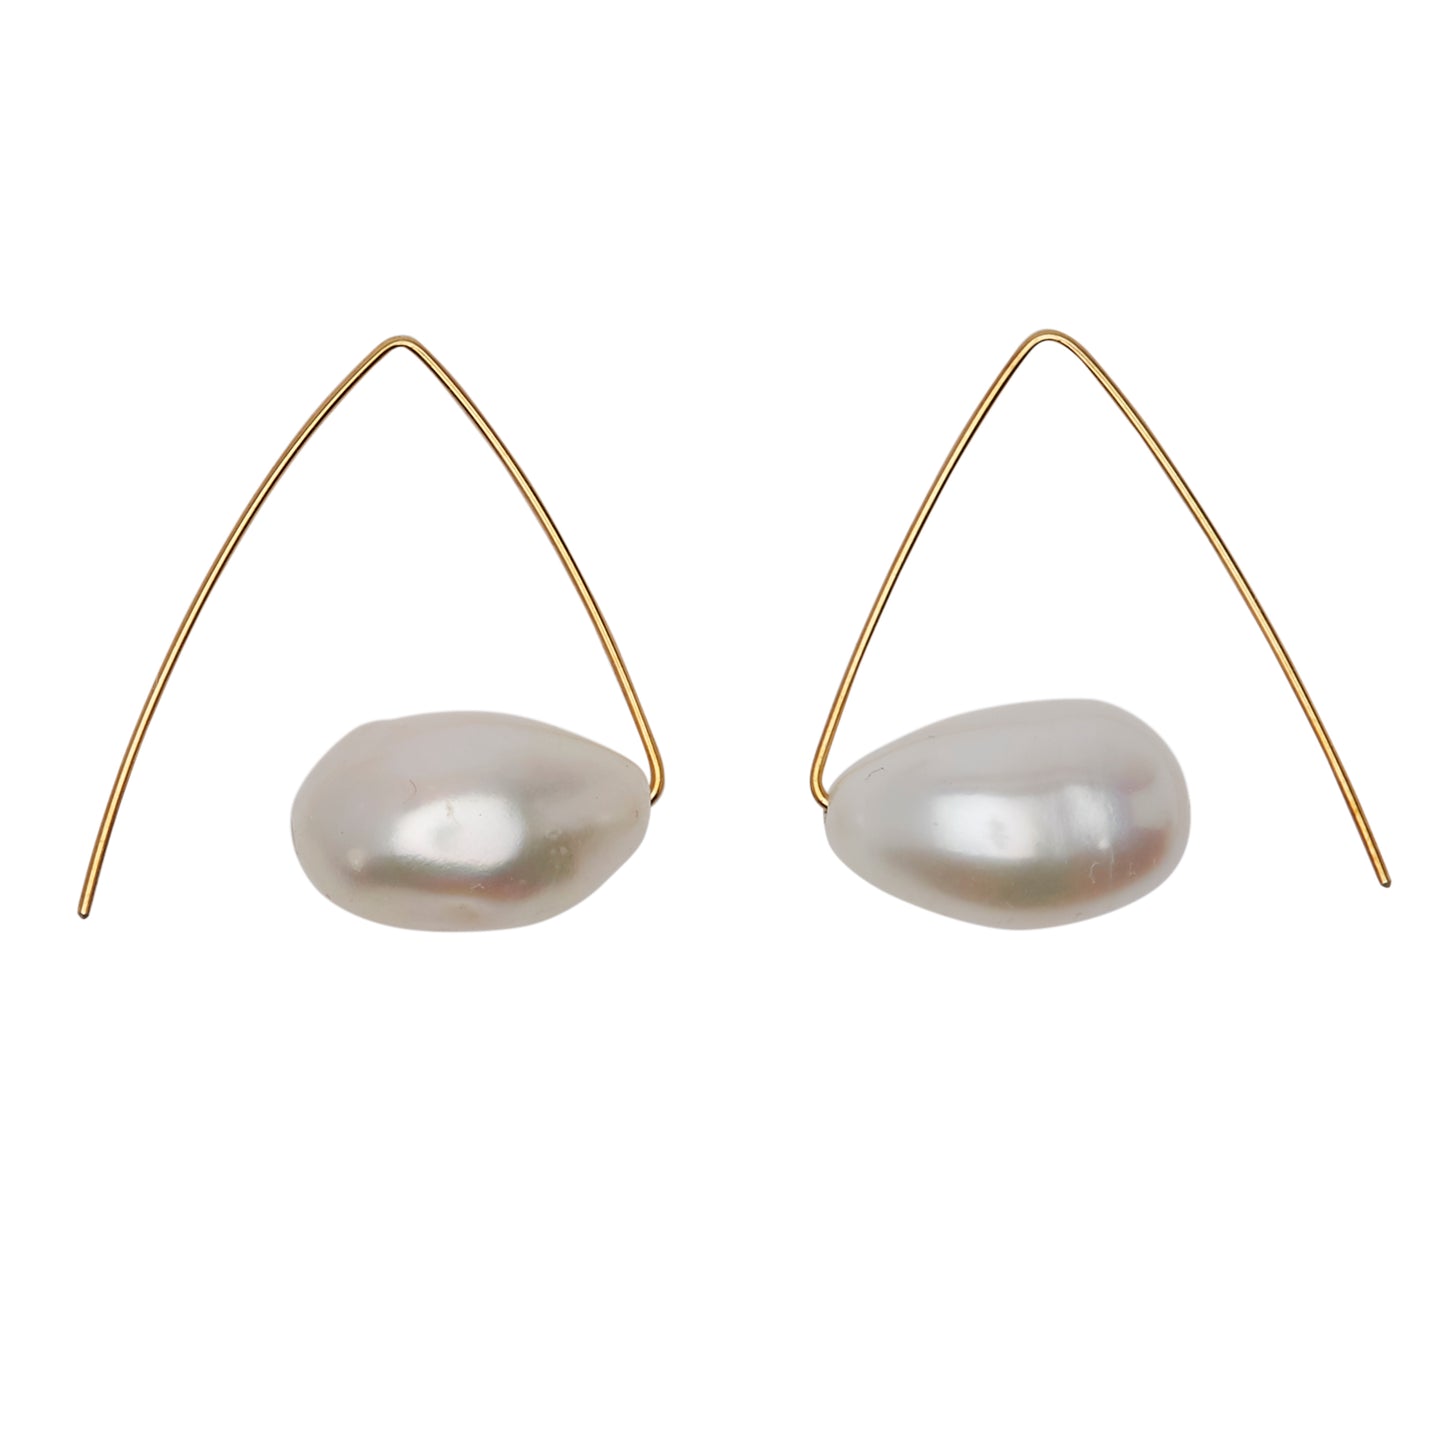 Petite Triangle Hoops with White Fresh Water Pearls Drop